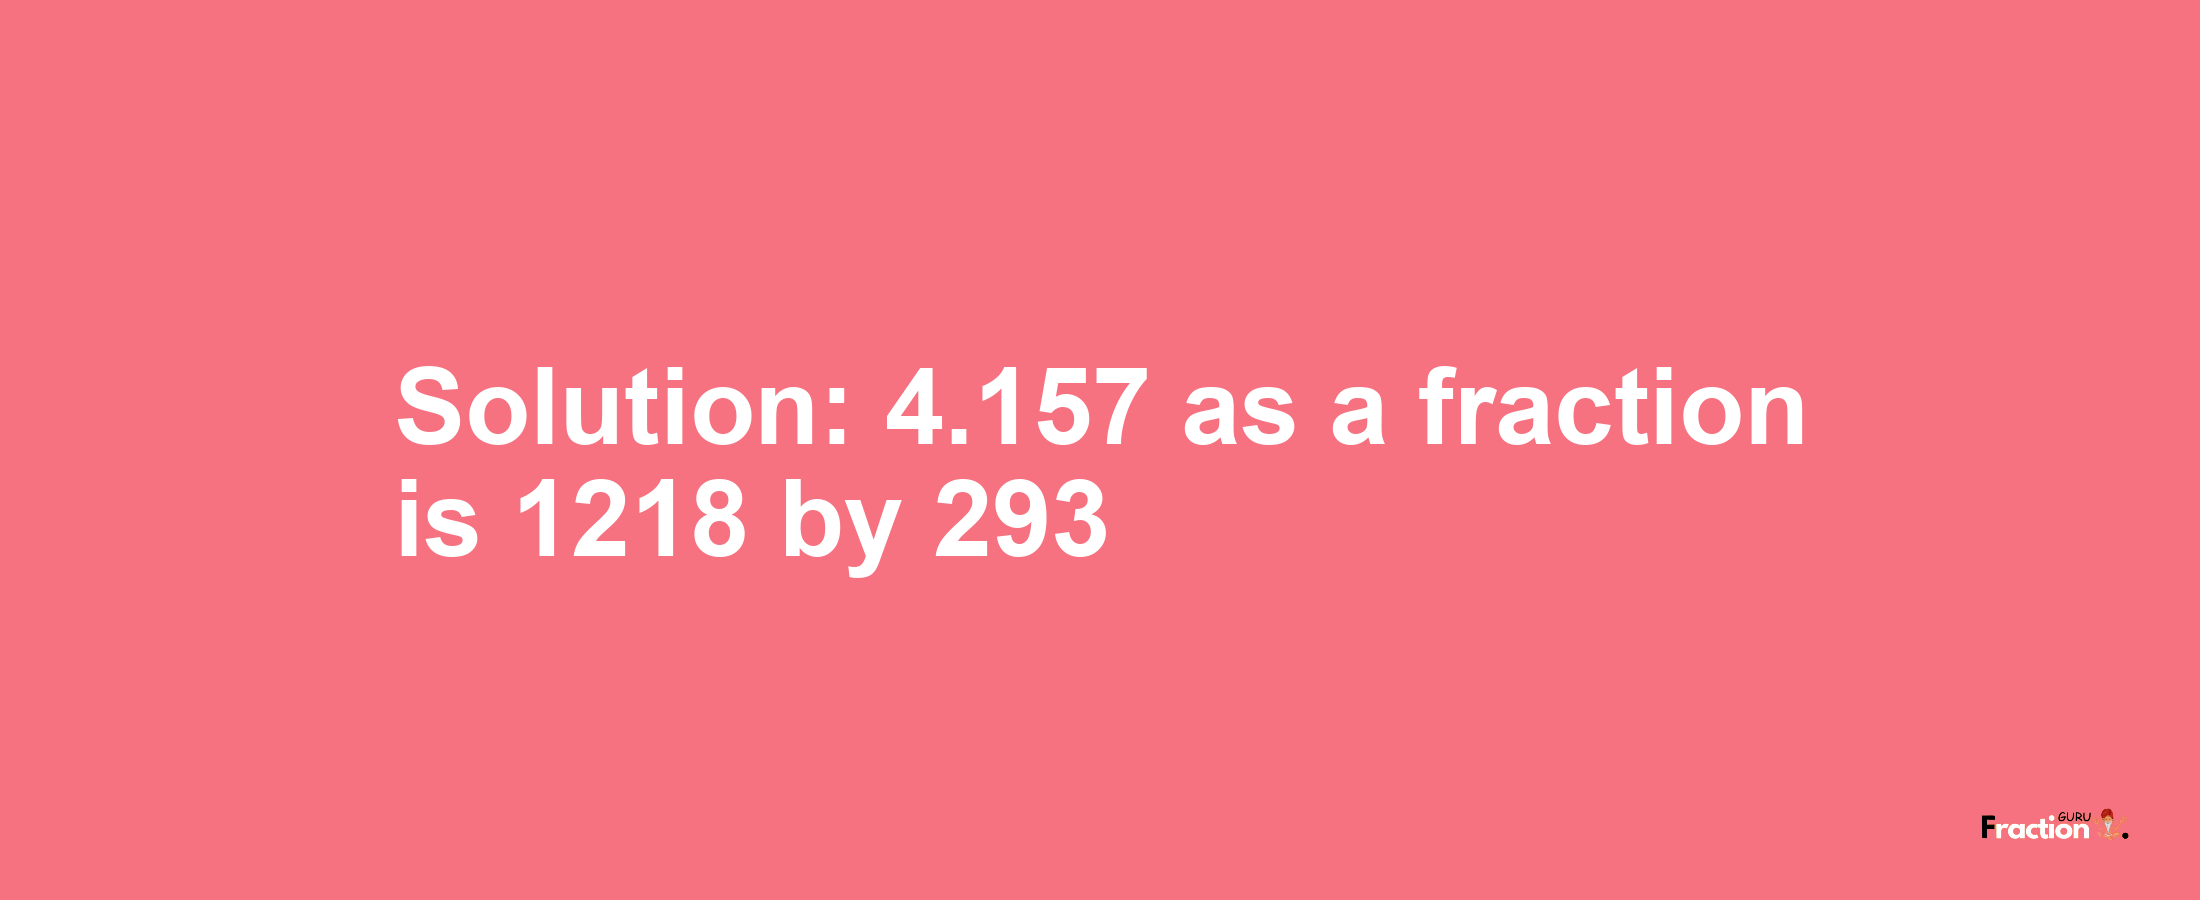 Solution:4.157 as a fraction is 1218/293